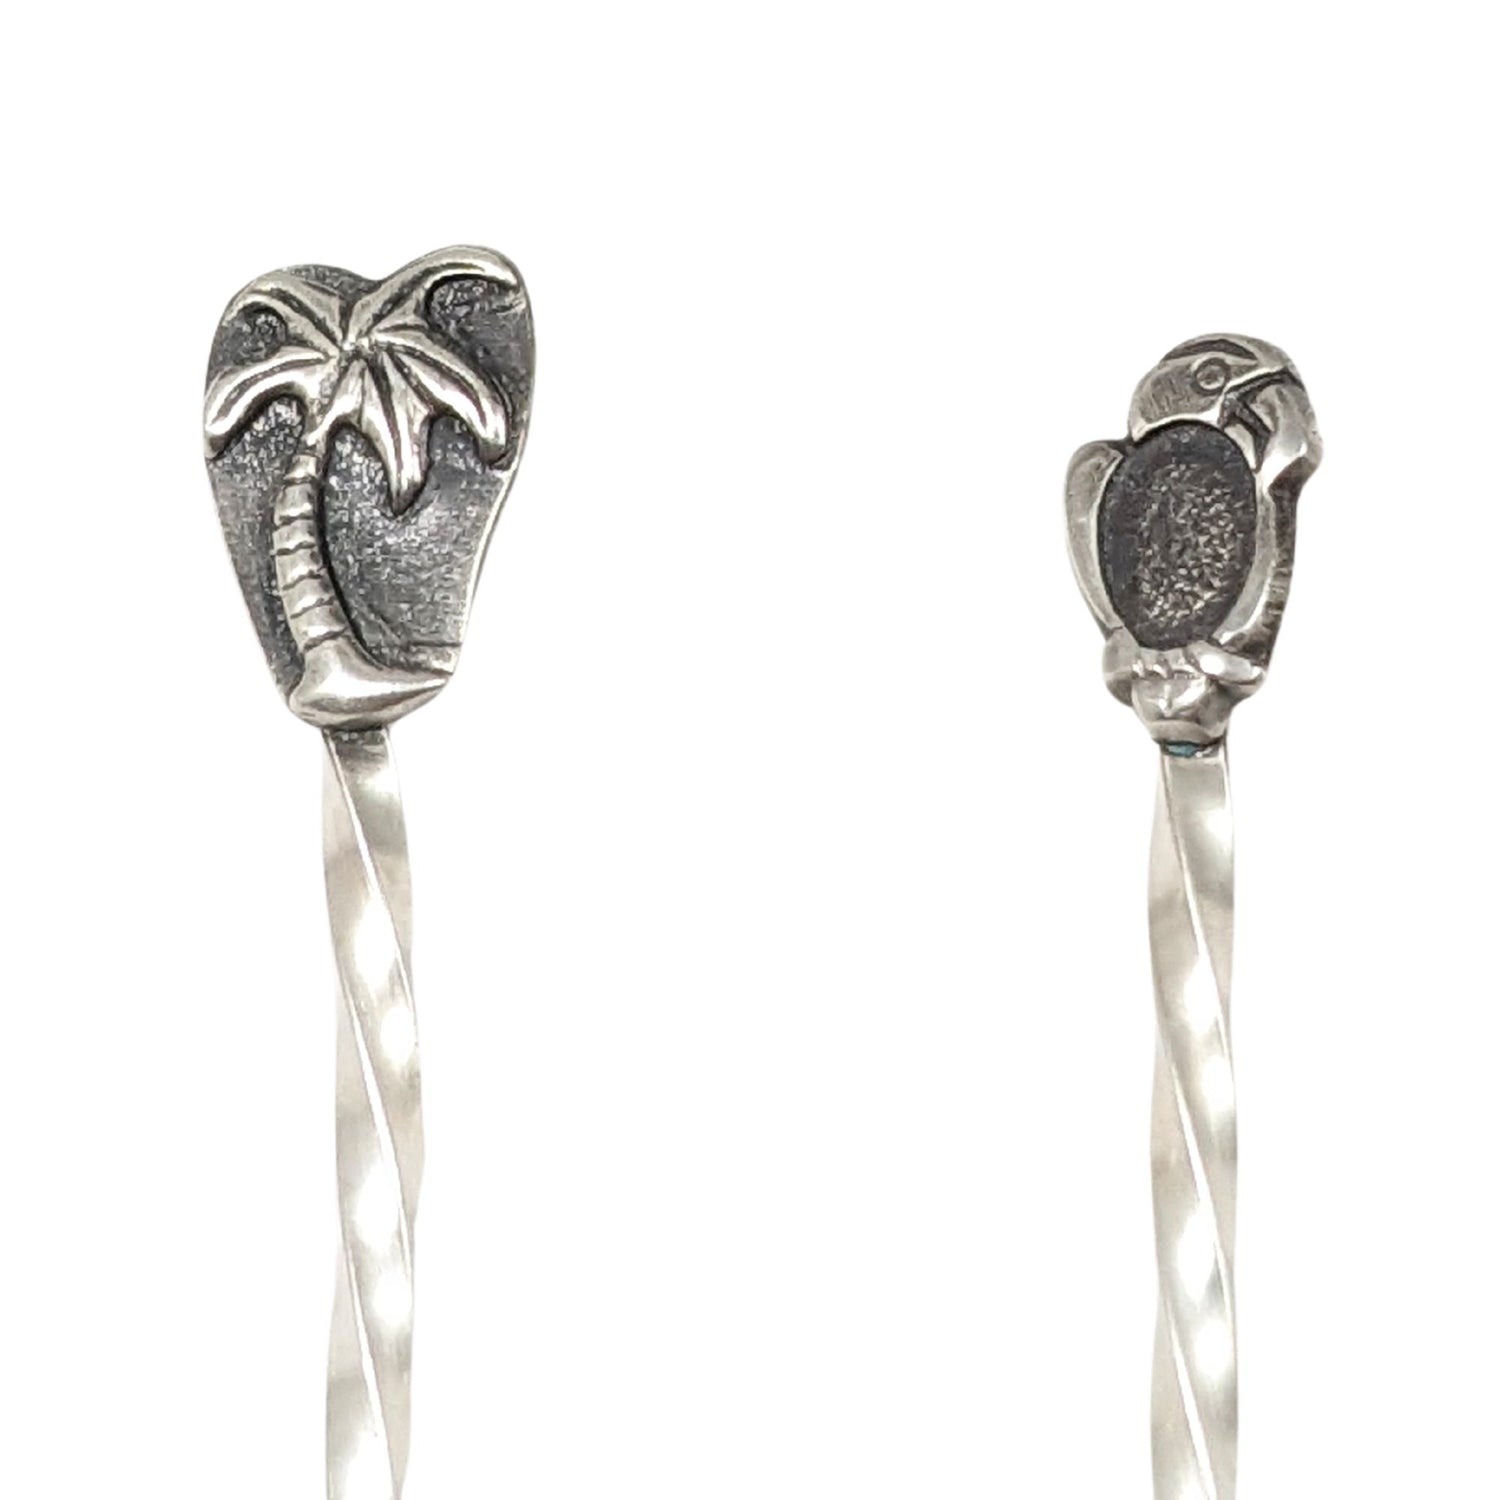 Pair of sterling silver cocktail picks. One has a palm tree, the other a parrot.